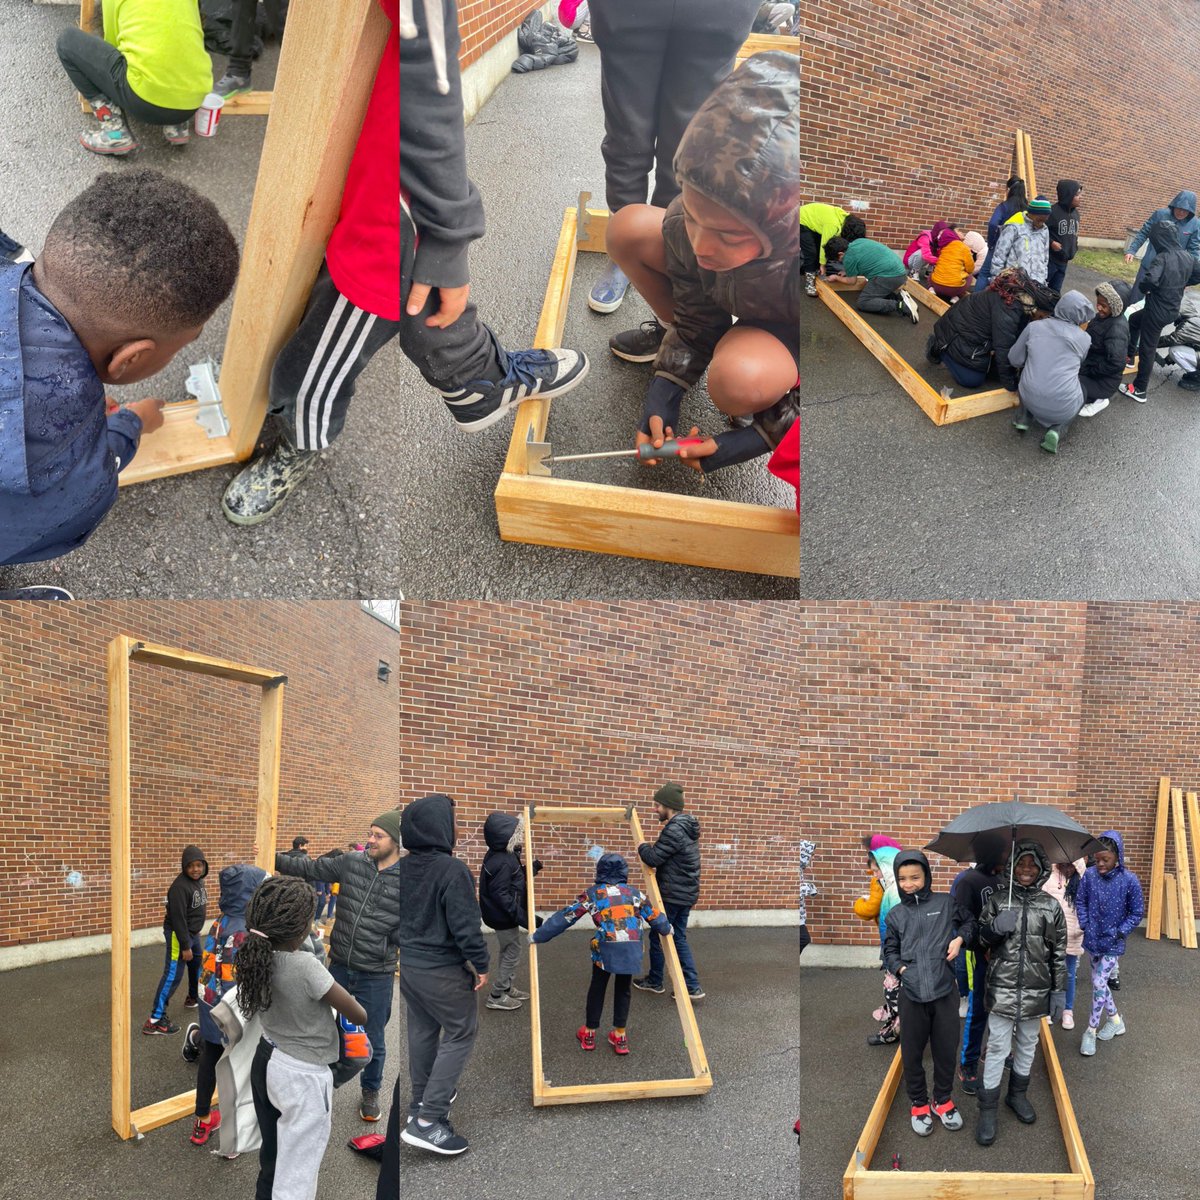 Students @PrincePeaceOCSB are working hard building these garden boxes with @GUOottawa ! 💚🌱🌎#ocsbSkilledTrades #ocsbEarth #ocsbGardens #ocsbEL @ocsbEco